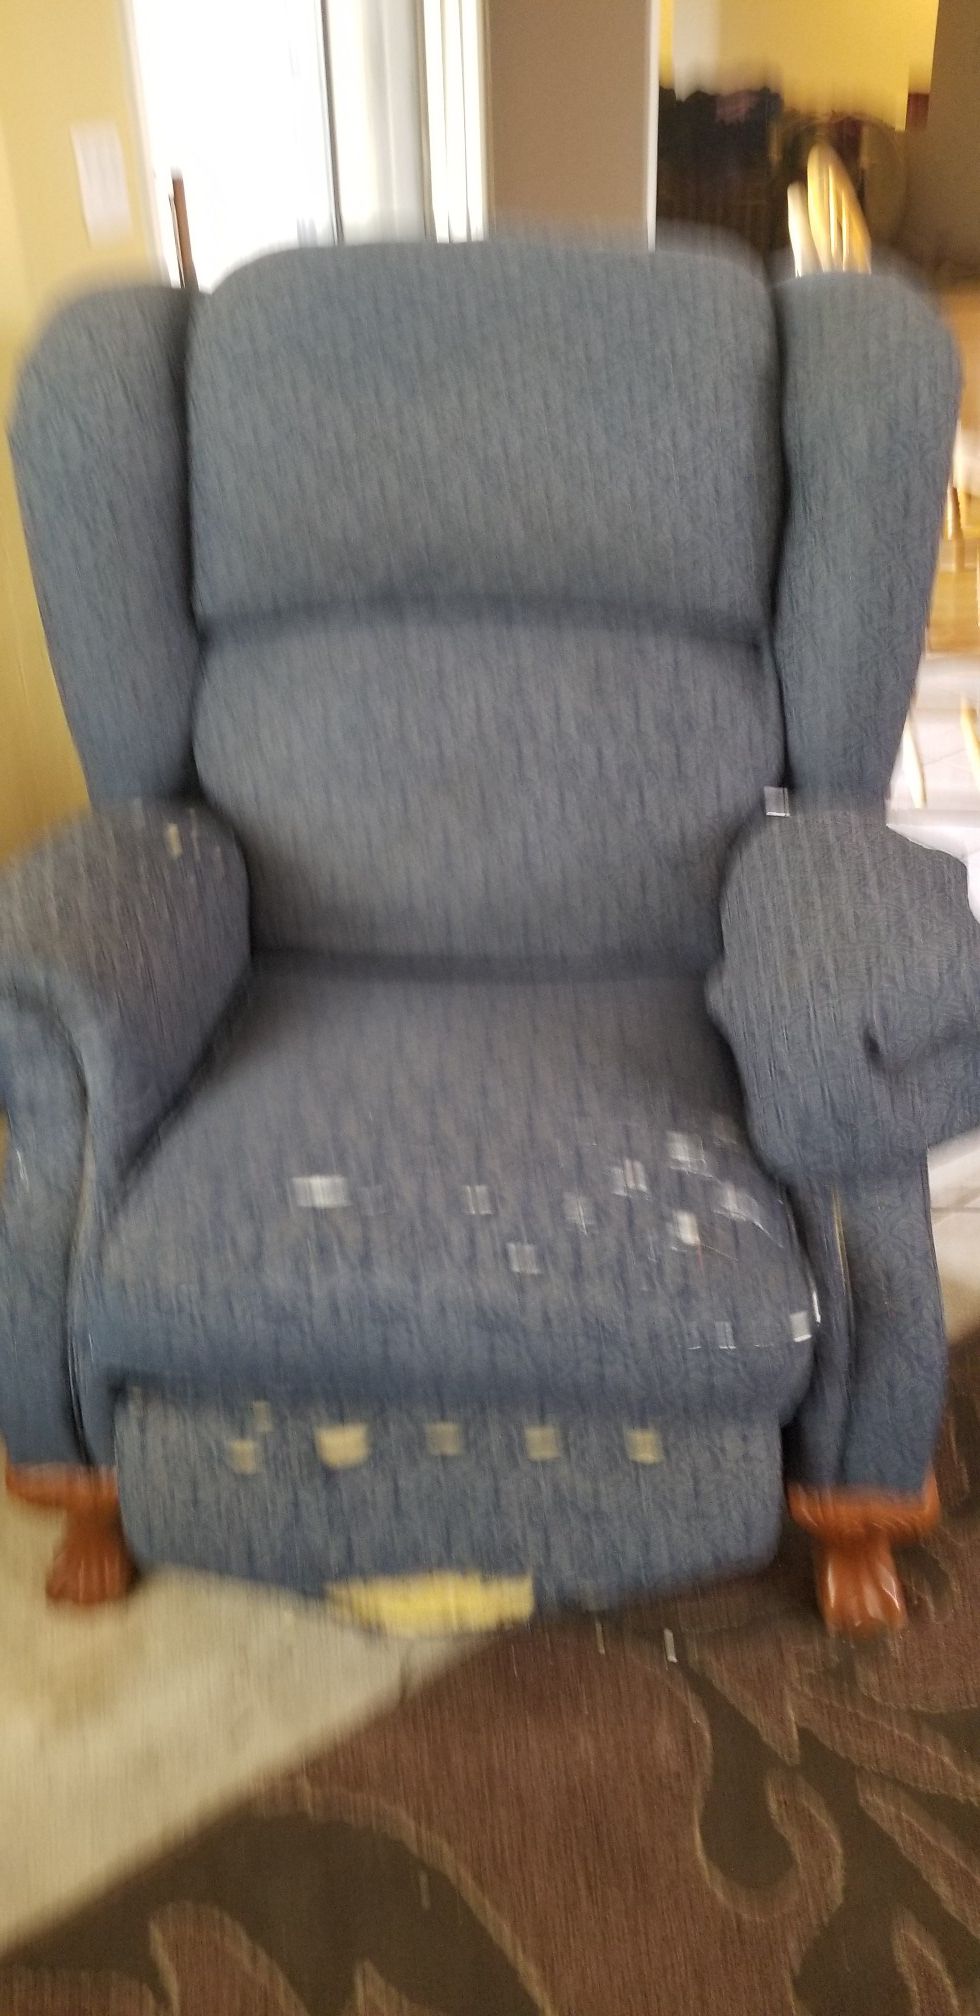 2 lazy boy recliners. Needs repairs